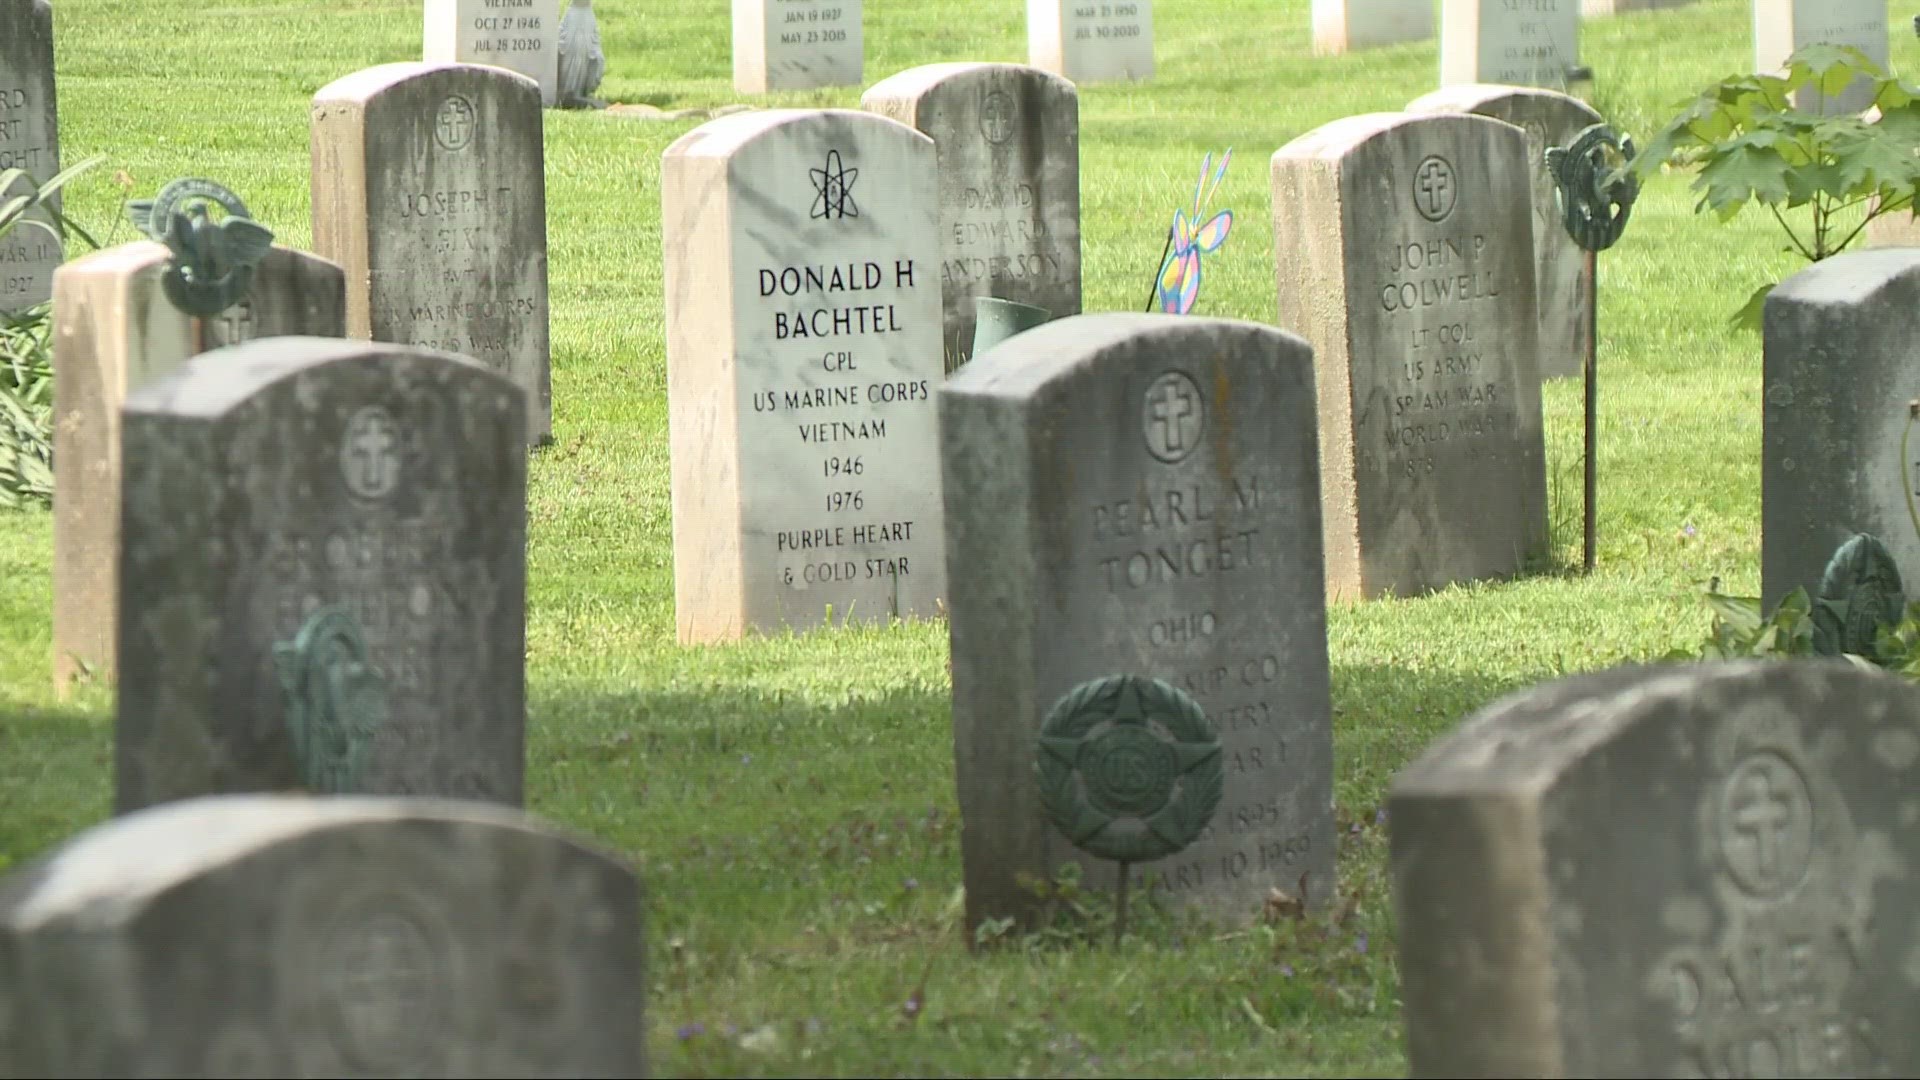 The 370-plus headstones in the cemetery's military section got a federally-approved spring cleaning, just in time for this weekend.